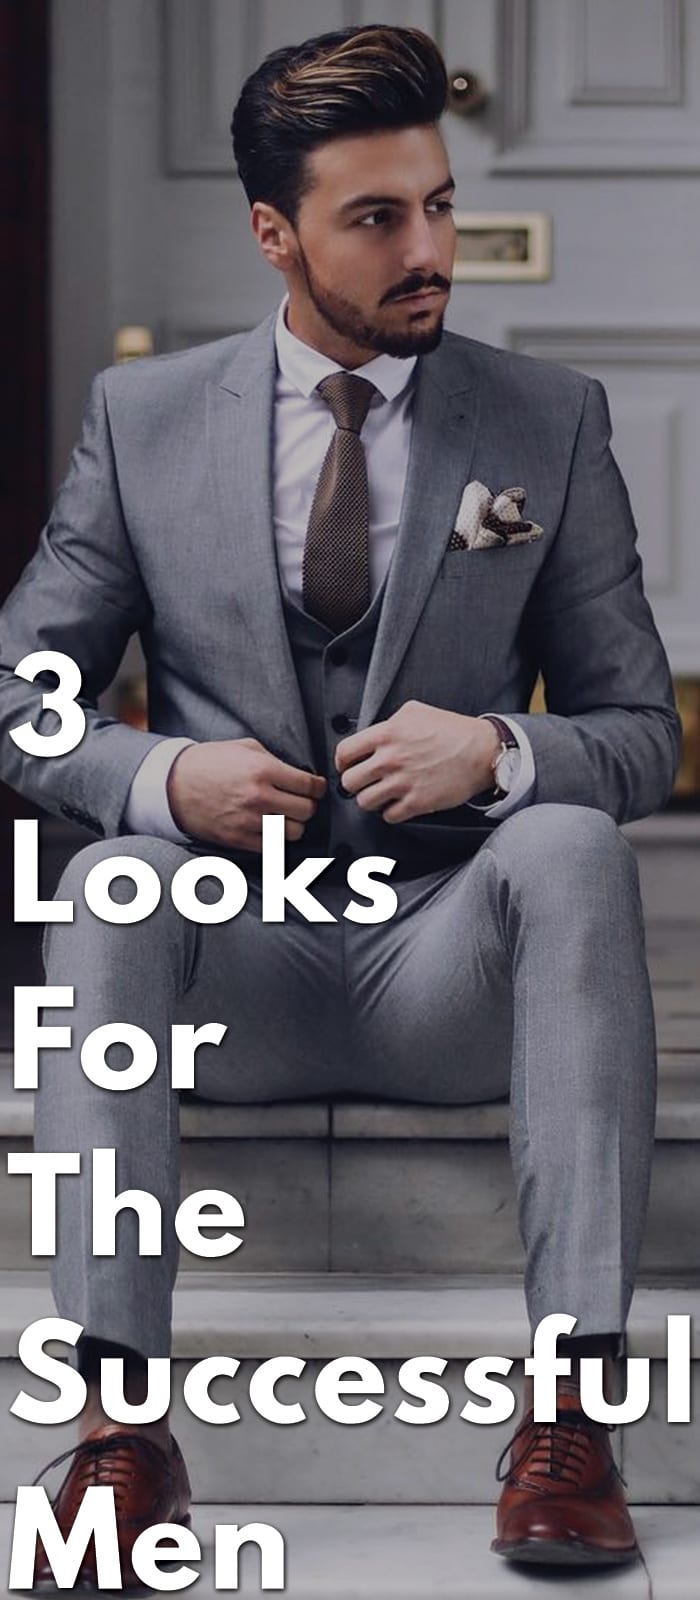 3 Looks For The Successful Man